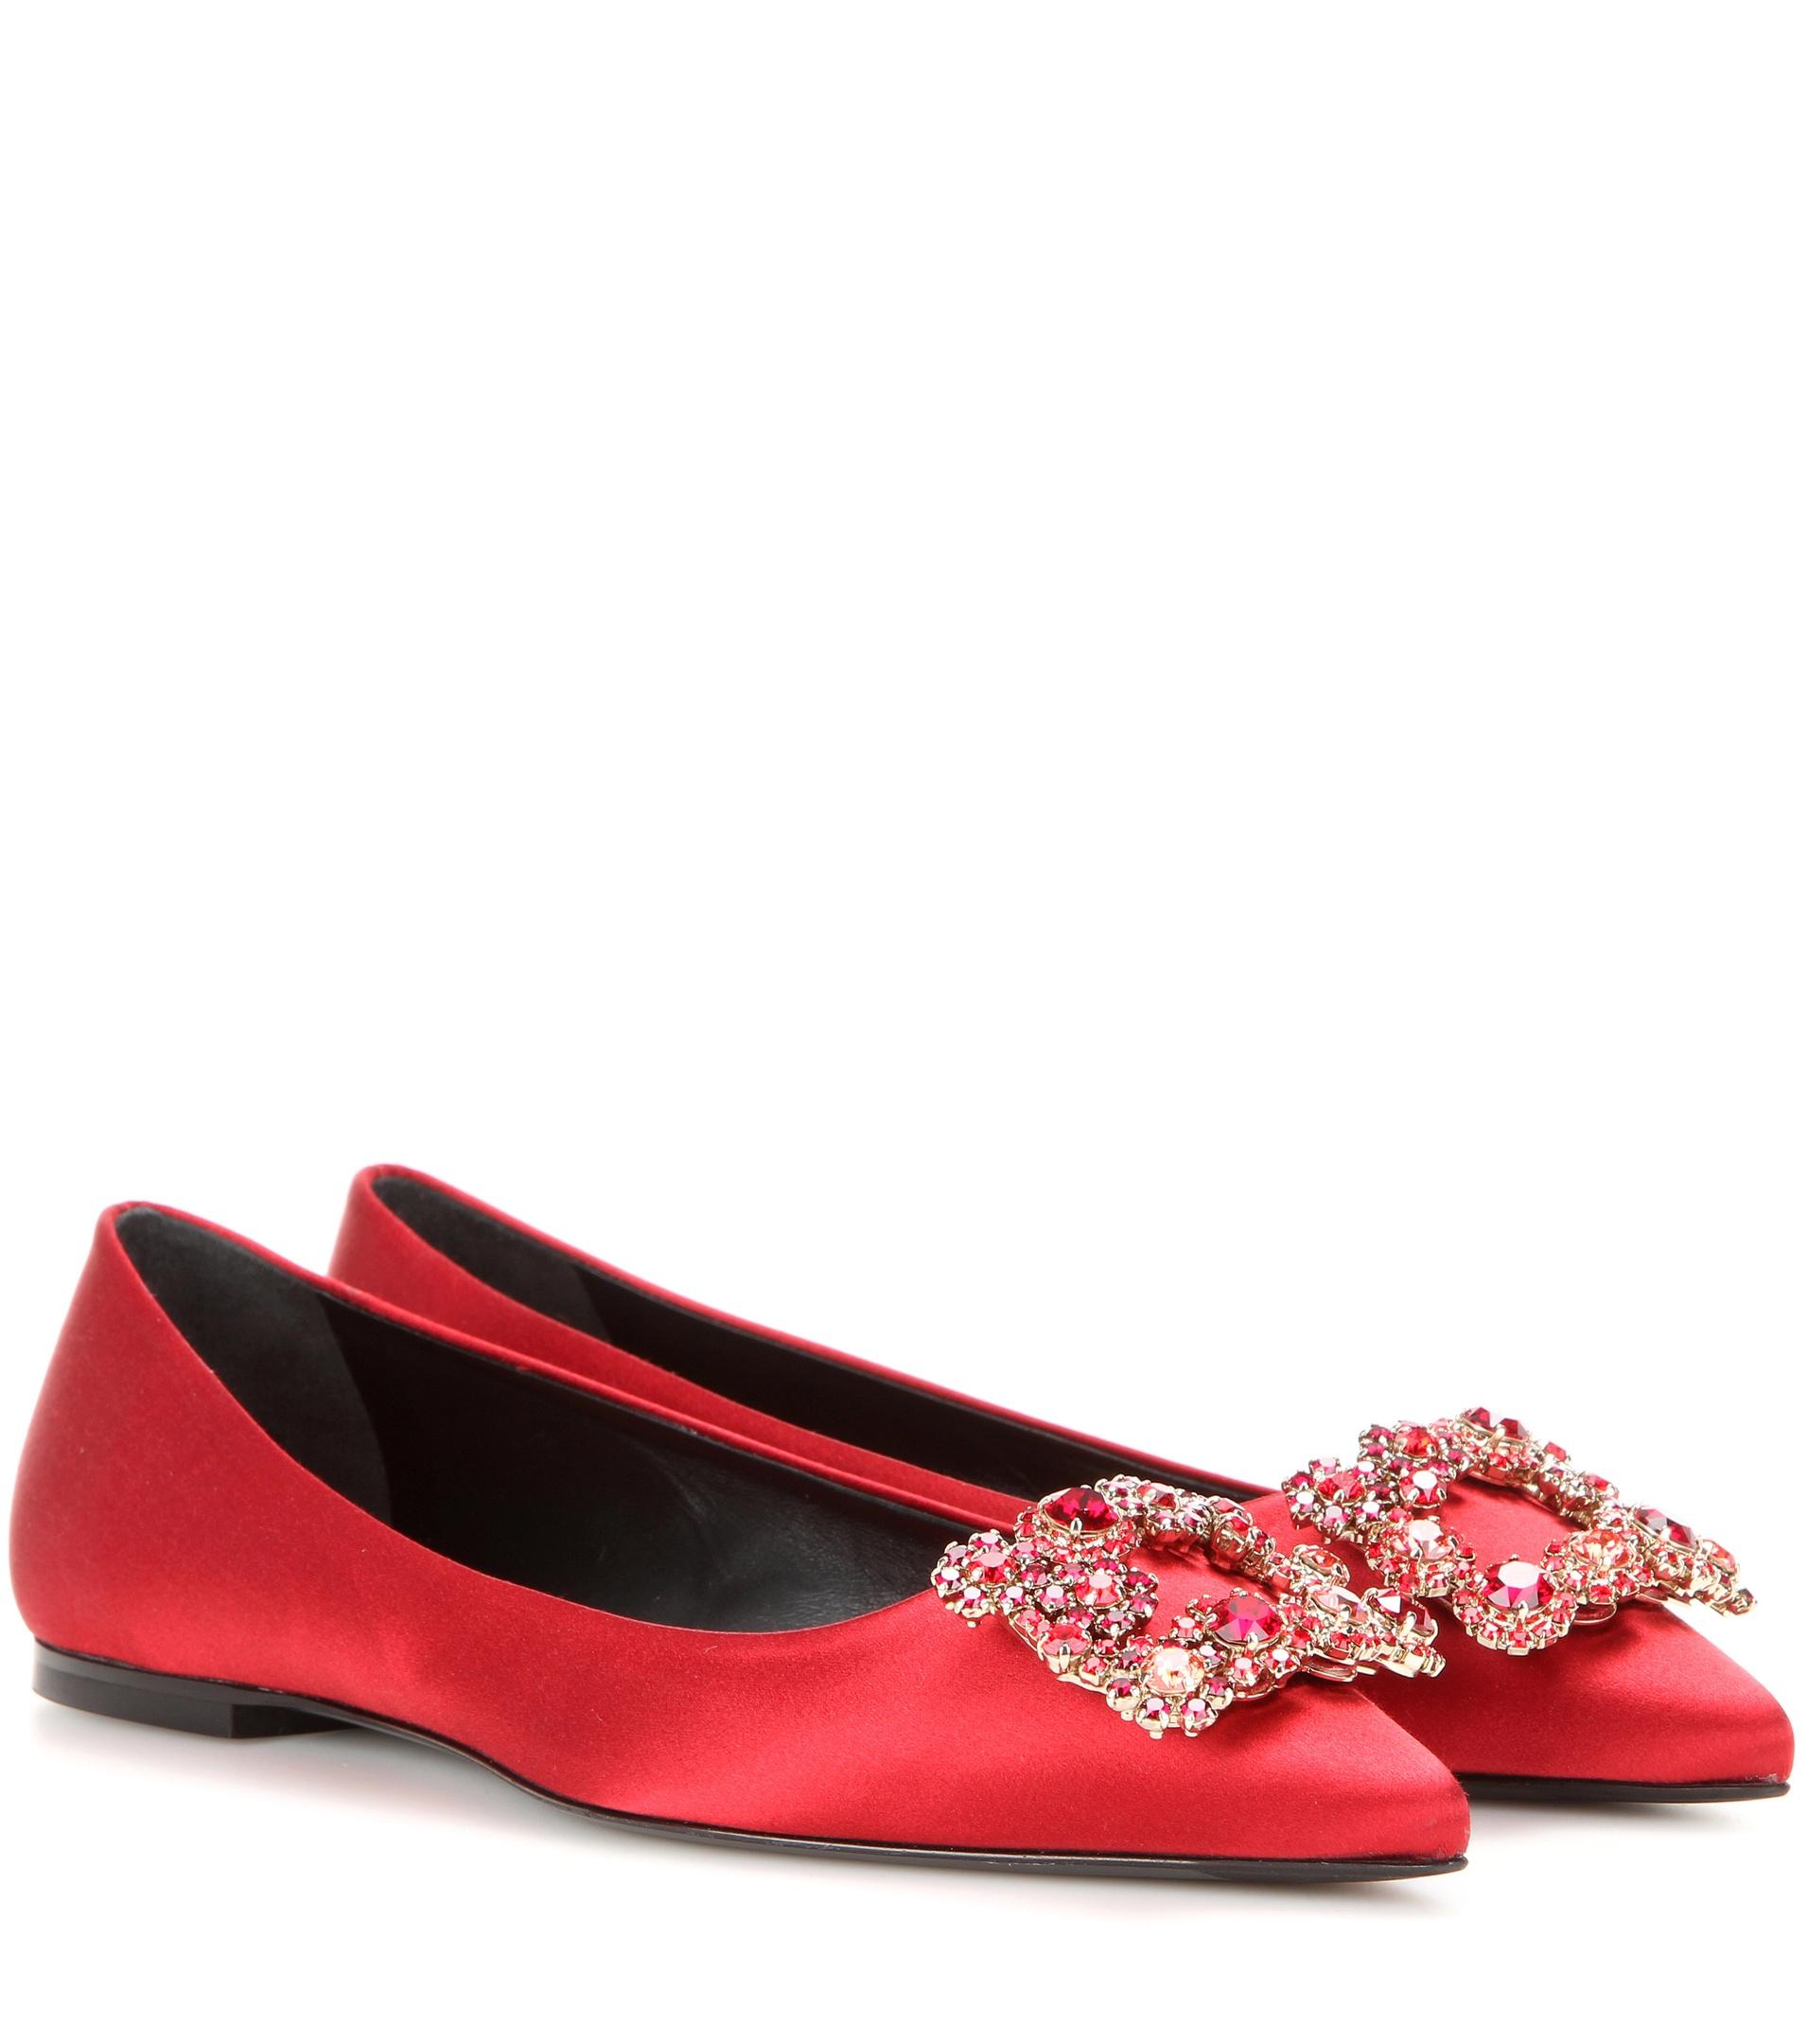 Lyst - Roger vivier Floral Strass Buckle Ballerina Flat in Red - Save 9%